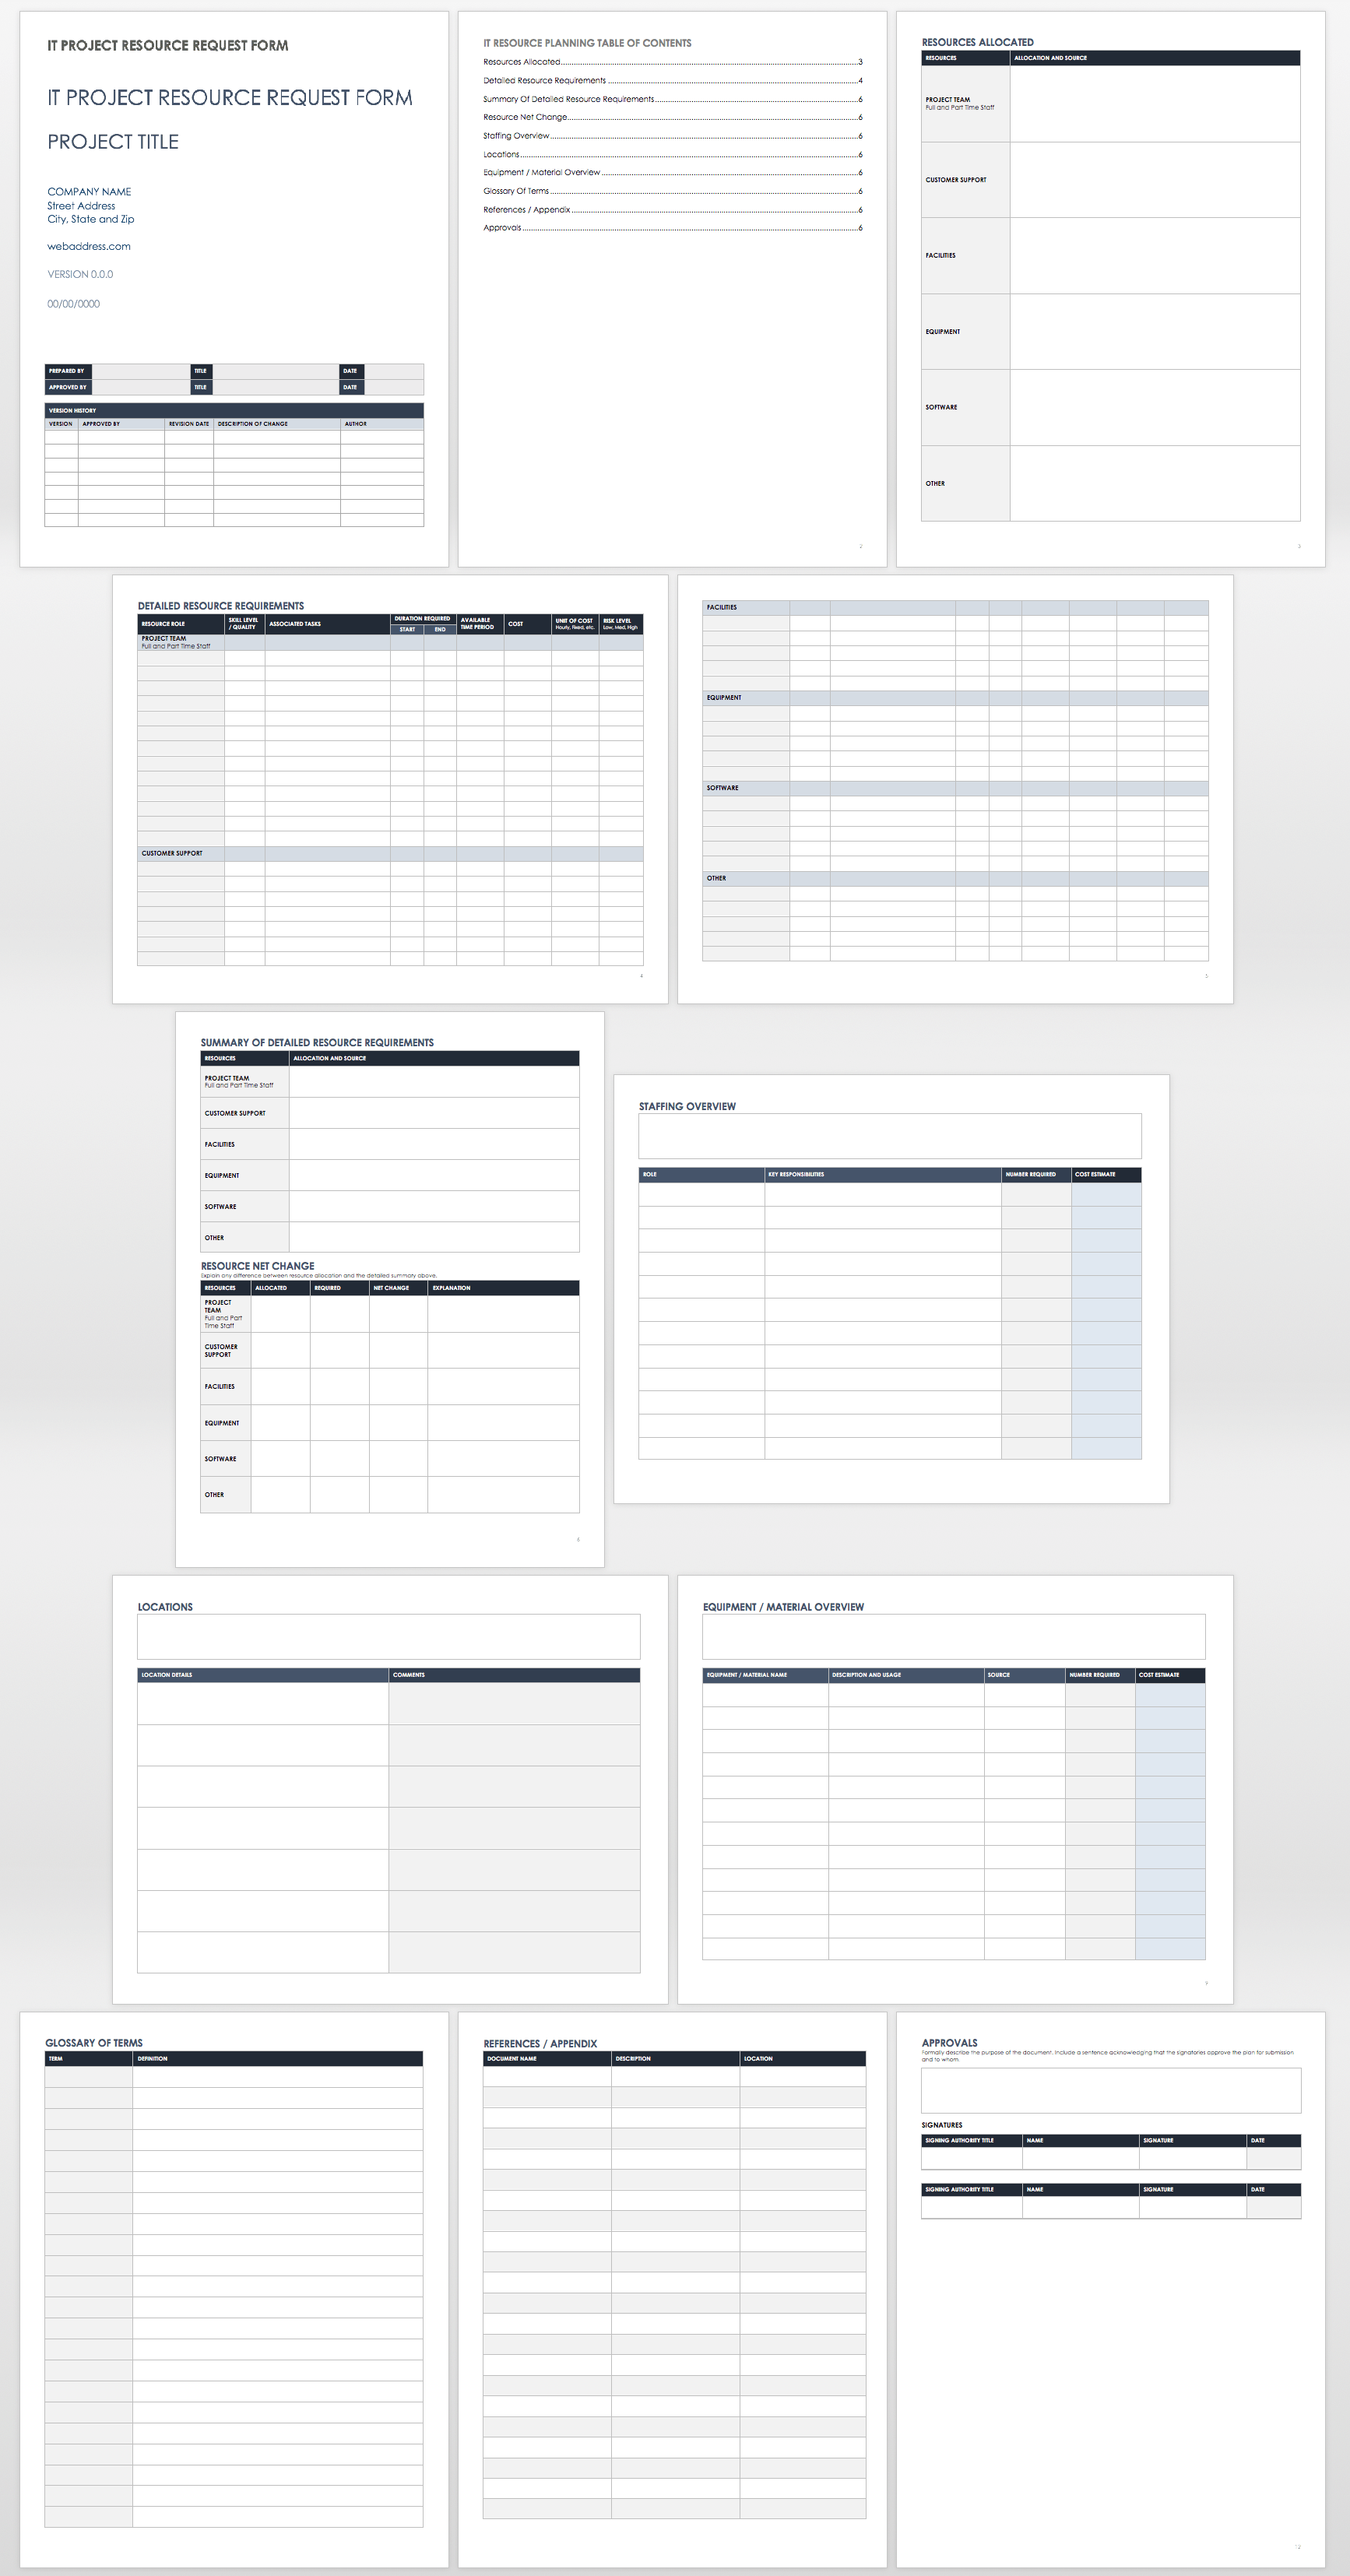 https://www.smartsheet.com/sites/default/files/2022-04/IC-IT-Project-Resource-Request-Form-Template_WORD.png